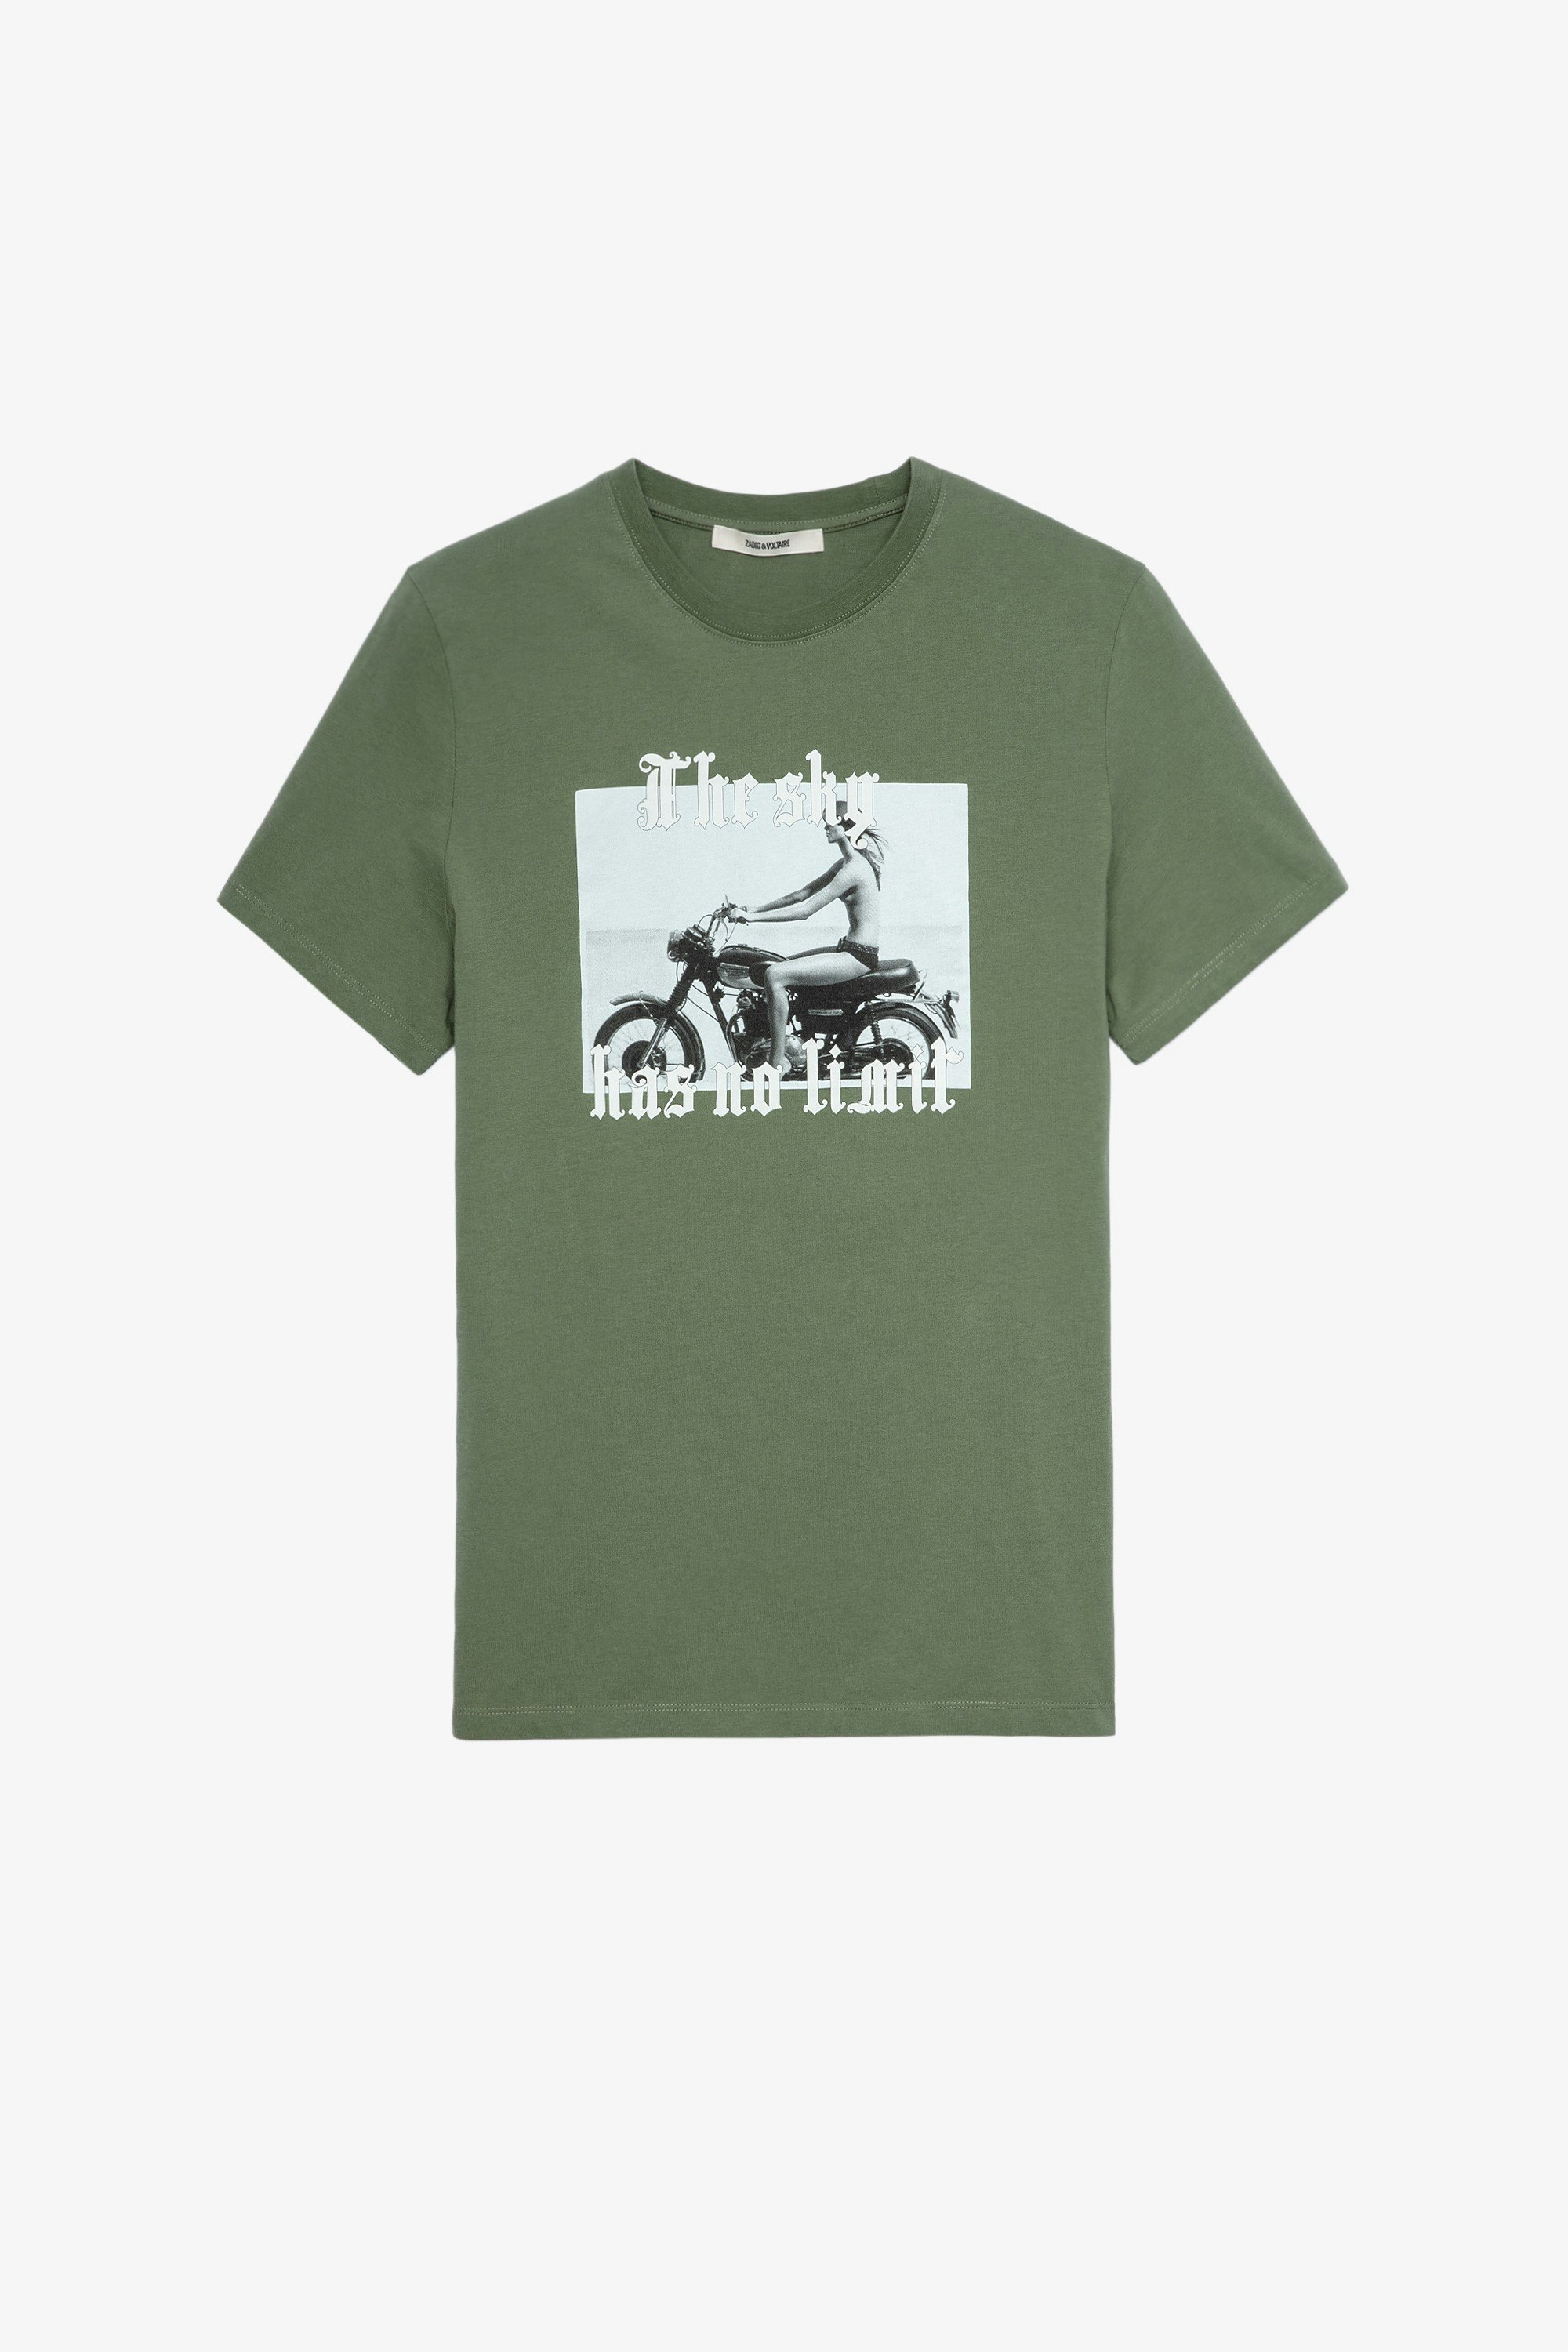 Ted Photoprint T-Shirt Men's short-sleeved t-shirt in khaki cotton with photo print